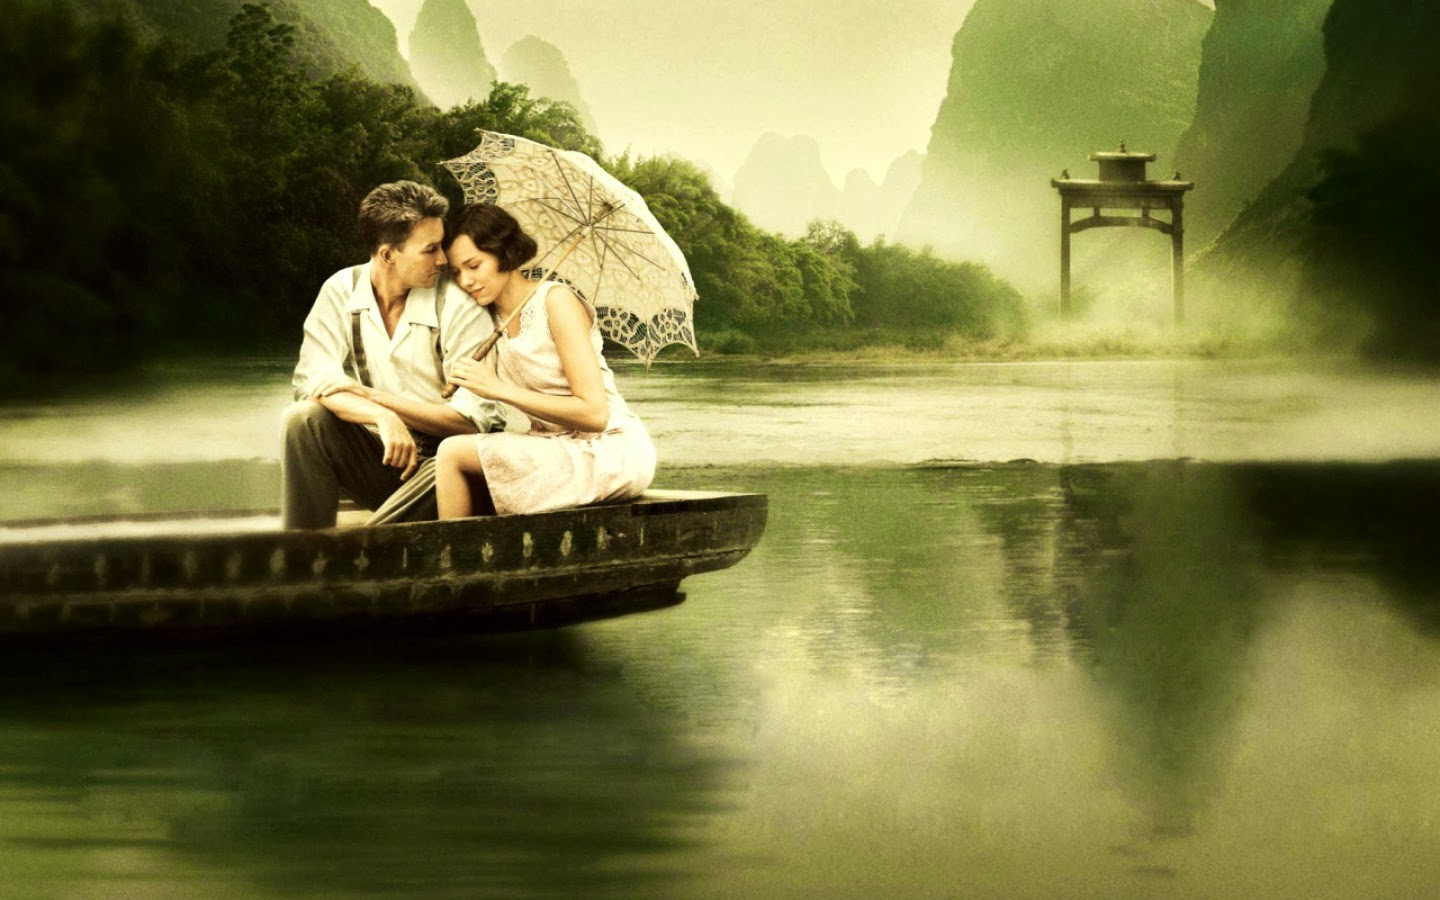 Romantic Couple HD Wallpaper And Image In Boat